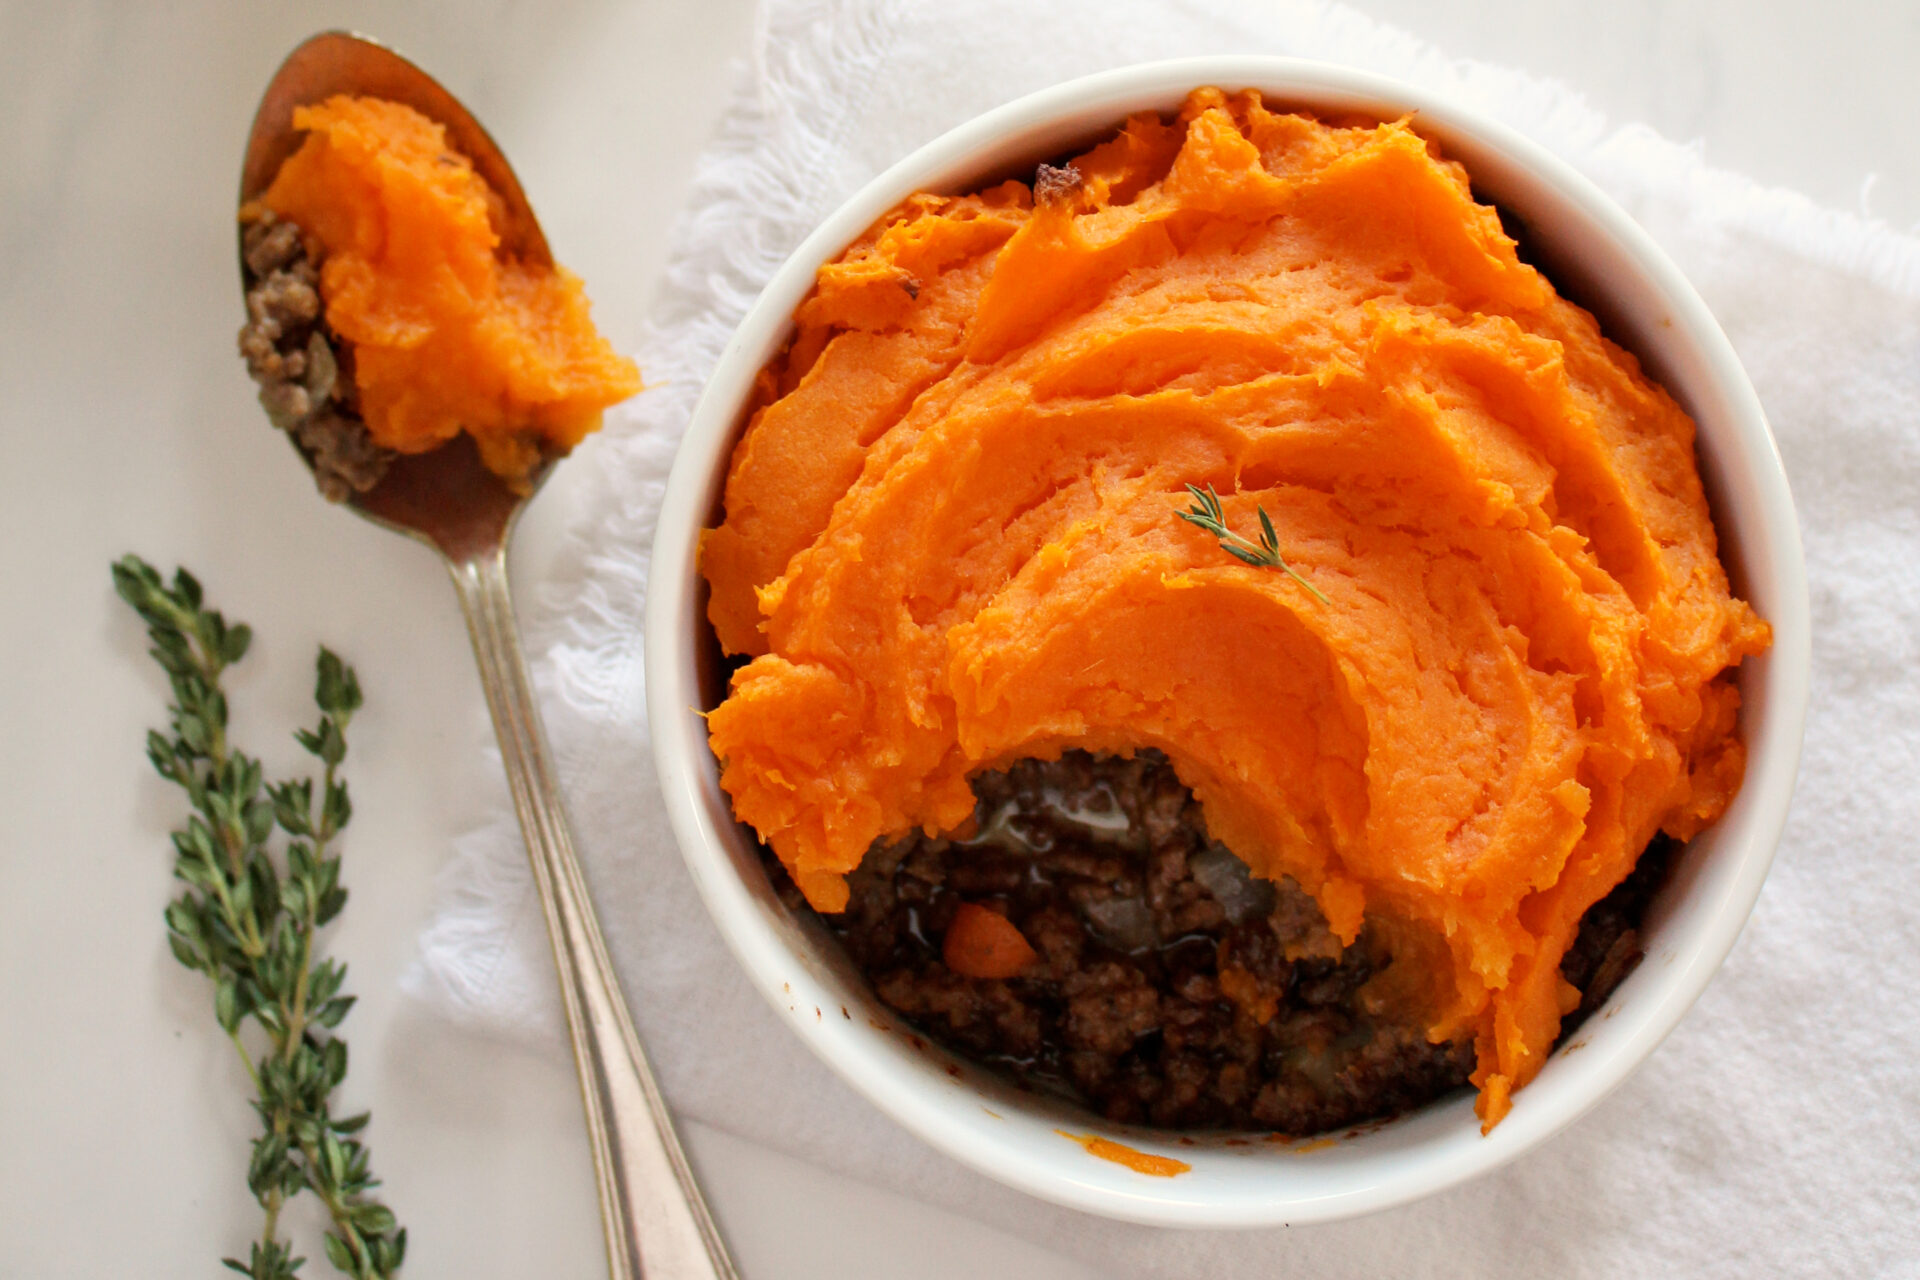 Bowl of sweet potato pie with bright orange mashed sweet potatoes covering beef mixture; one spoonful has been dug out to reveal bottom of pie and rests on spoon beside dish.